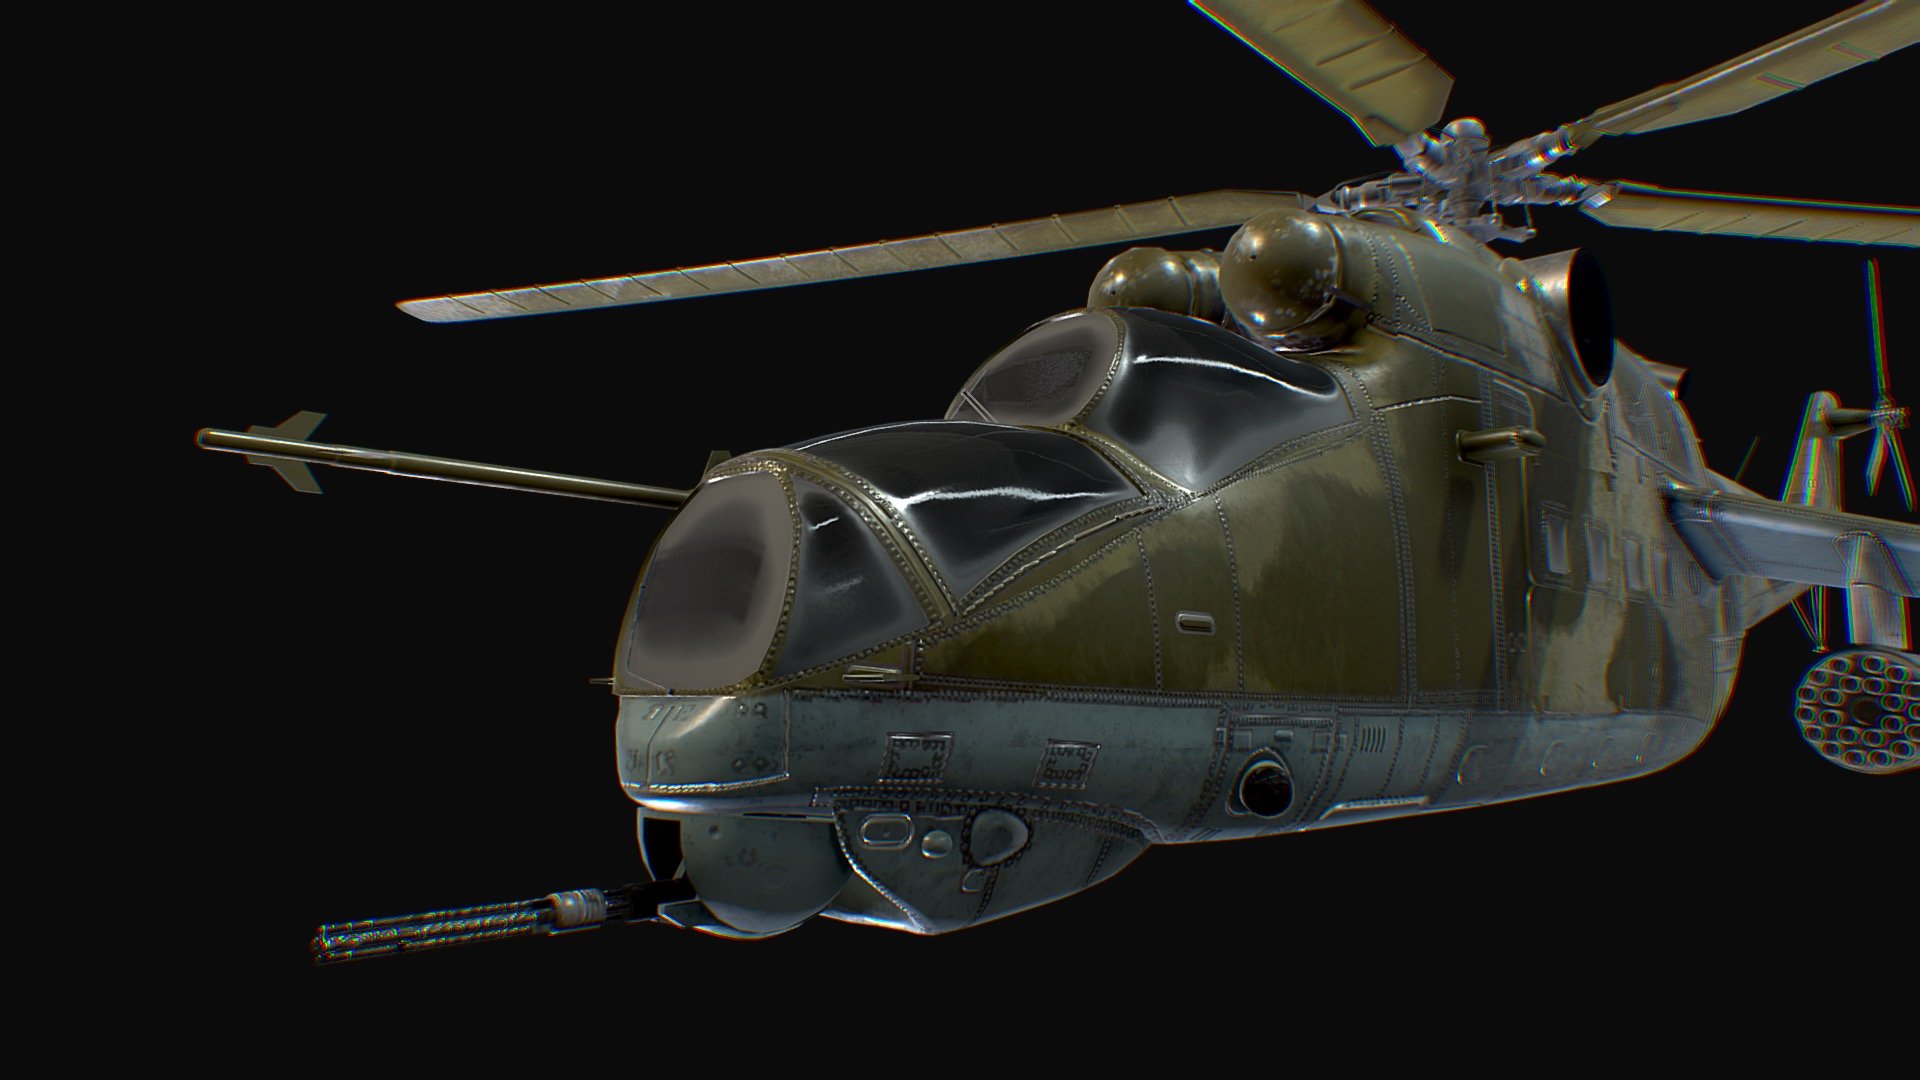 Vehicles, Helicopter:

DESCRIPTION:

GAME READY MODEL!! 
* Helicopter! This model is provided as obj, fbx and SPP format.
* SubstancePainter - file provided. (FULL SOURCE FILES) exported for any enjine!
* Blender file provided with shaders and light set-up for PBR
* Unreal UE4 Asset Package Provided!
* .tbscene Asset Package Provided!
* .mview and .glb Asset Package Provided!
* Different versions of 3ds max scenes are provided.
* Marmoset Toolbag - file proviede (.tbscene scene)
* Provides full textures for the Helicopter. Textures in the resolution of 4096x4096. Enjoy using! :) - Helicopter - Source Files Attached 8K - Buy Royalty Free 3D model by sergey.koznov 3d model